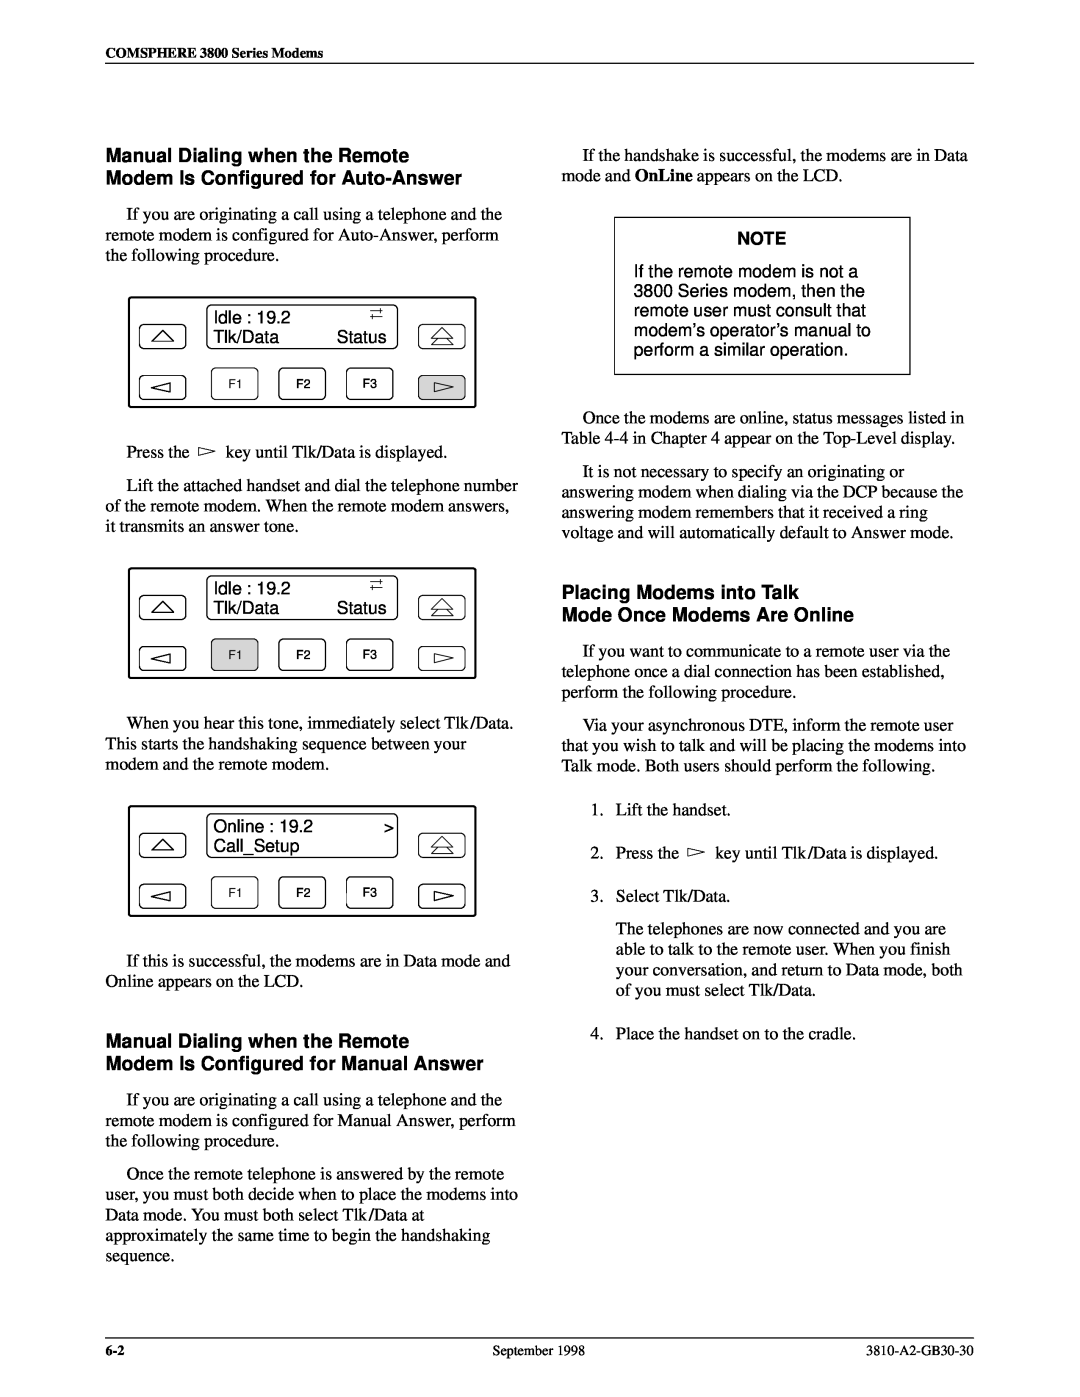 Paradyne 3800 manual Manual Dialing when the Remote Modem Is Configured for Auto-Answer 